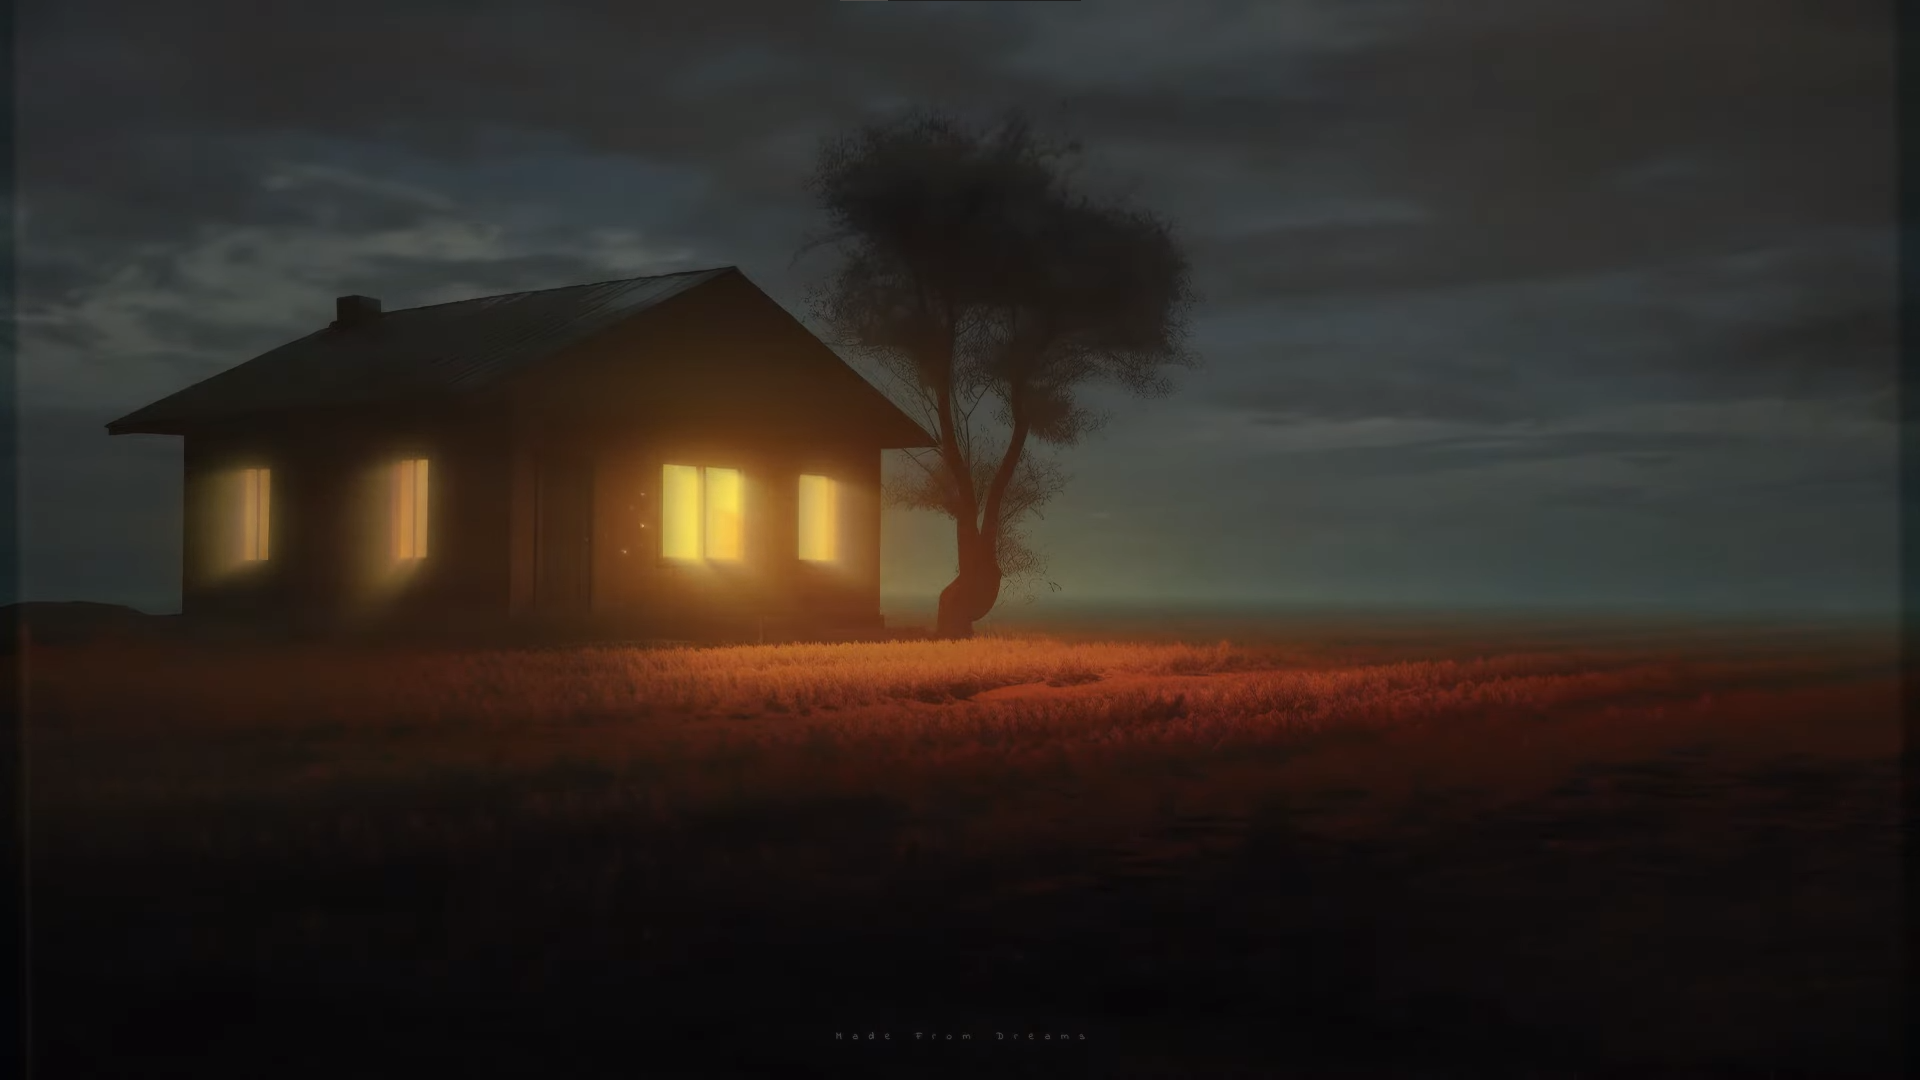 General 1920x1080 digital art isolated house clouds sky artificial lights trees landscape outdoors